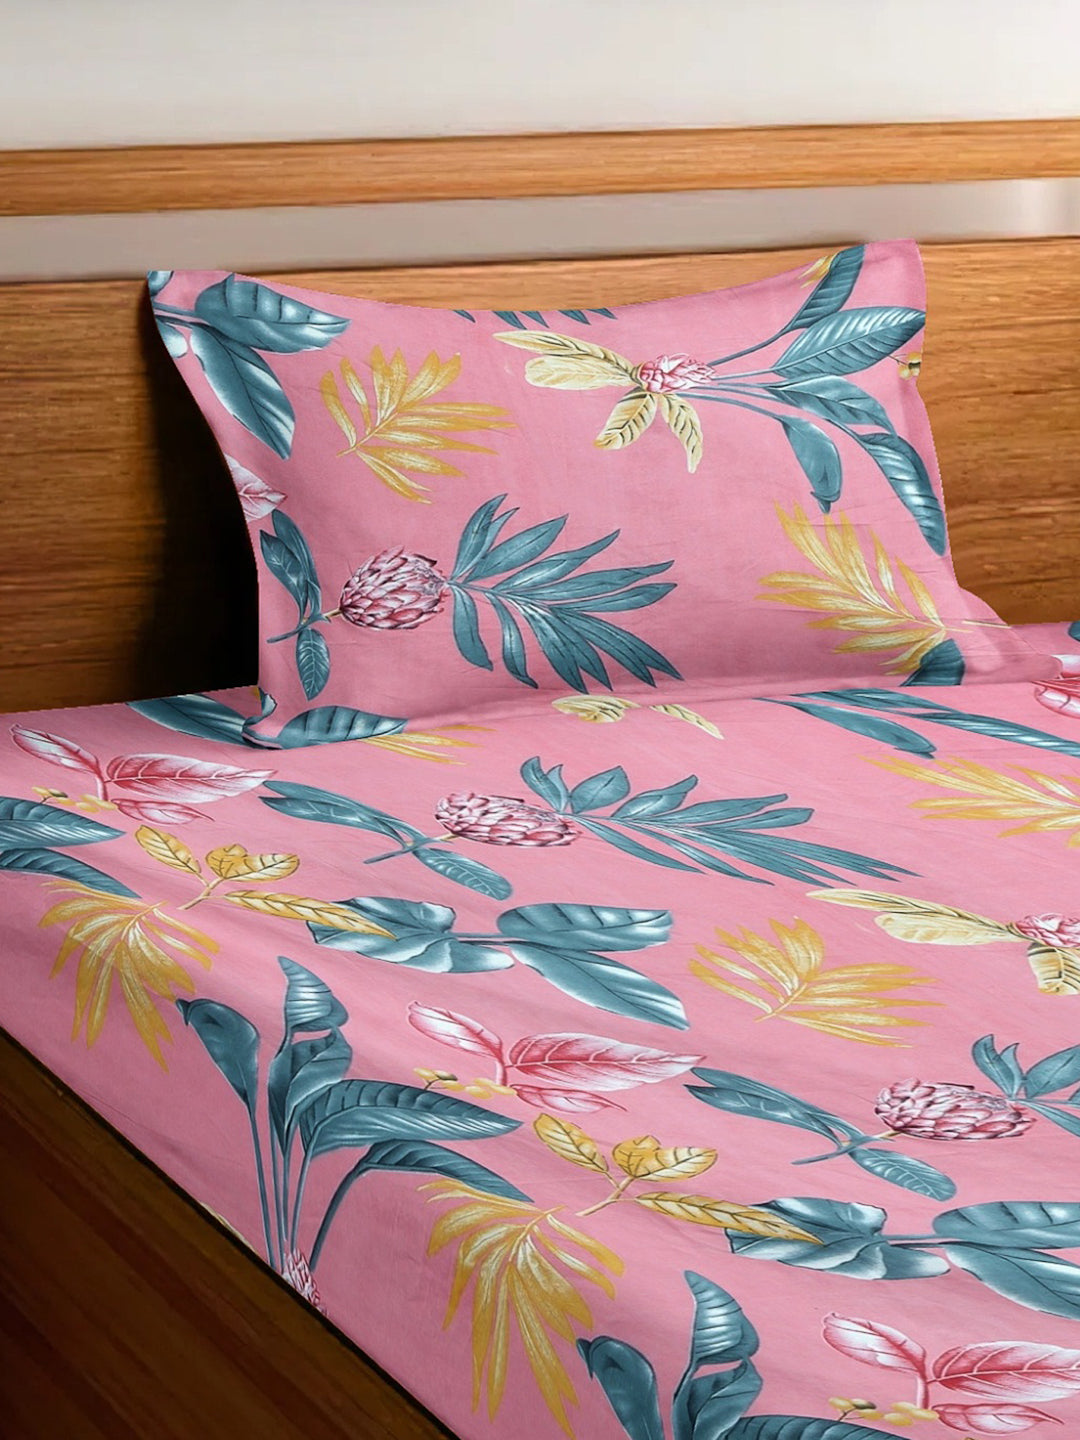 Arrabi Pink Floral TC Cotton Blend Single Size Fitted Bedsheet with 1 Pillow Cover (215 x 150 cm)